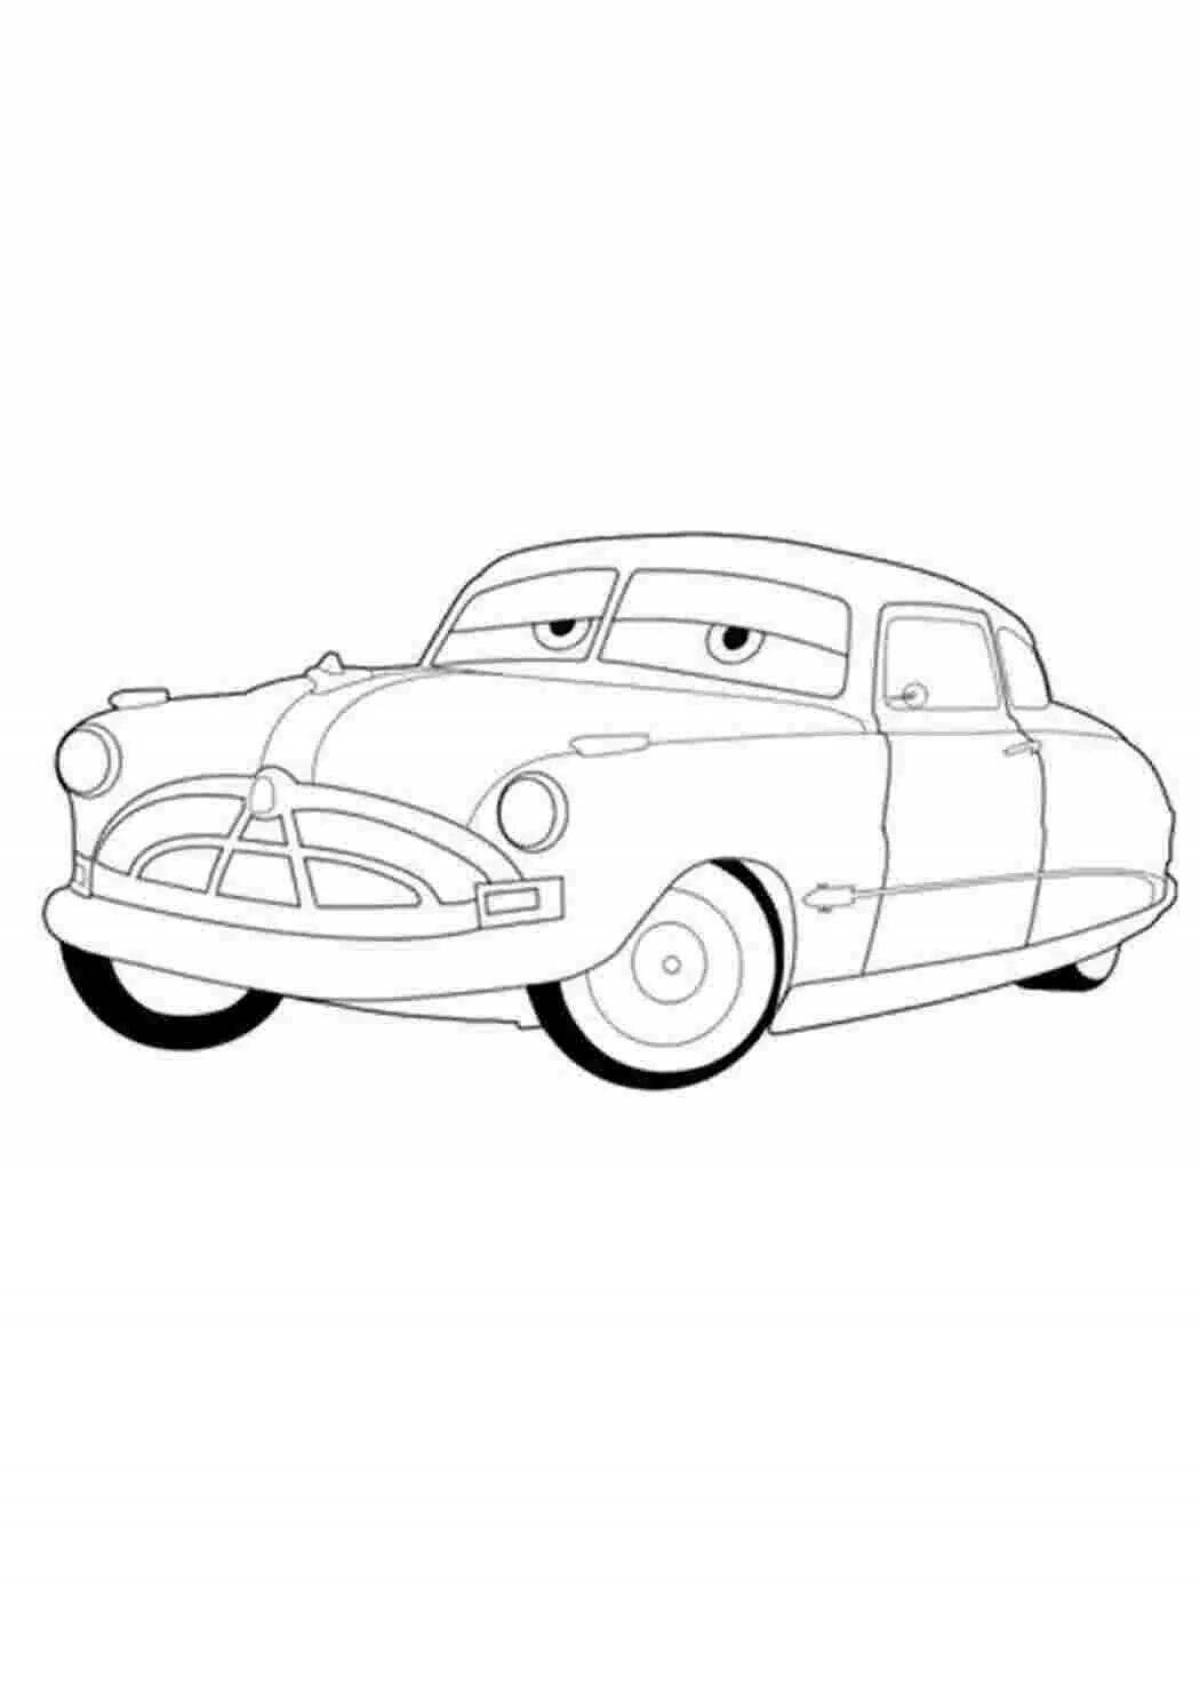 Sheriff's dazzling car coloring page